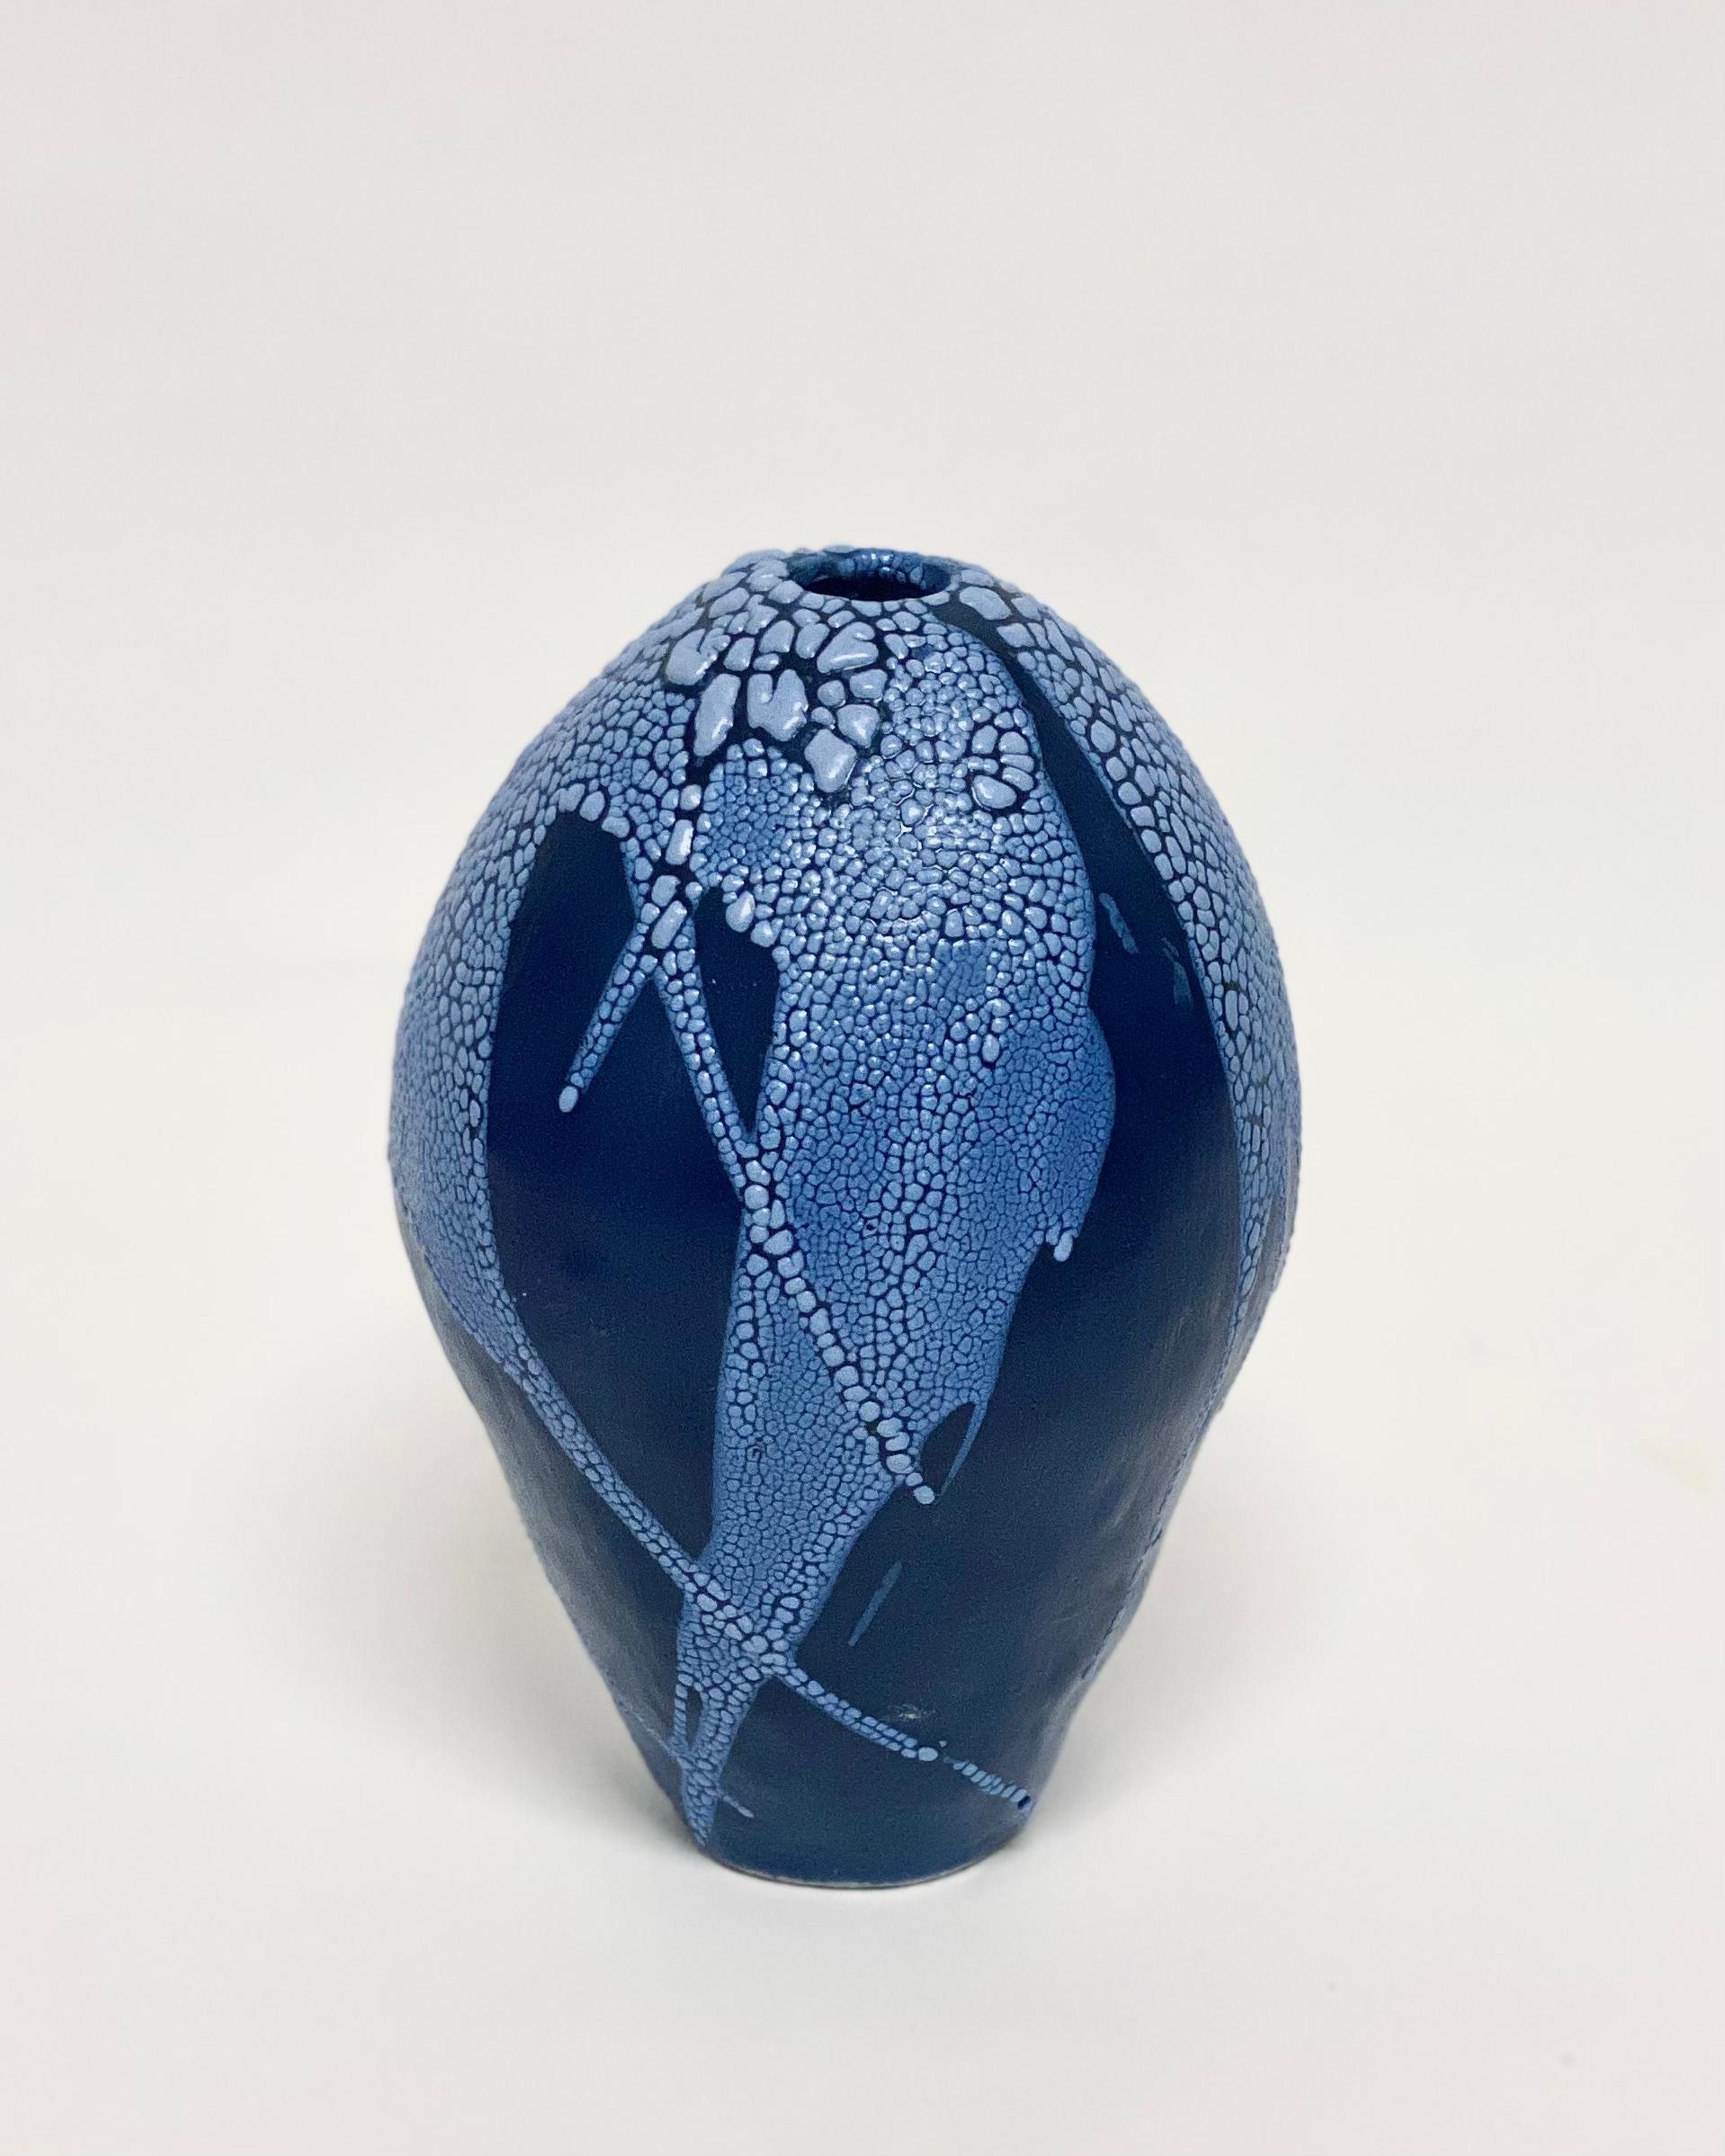 Blue/Blue dragon egg vase by Astrid Öhman
Handmade
Dimensions: D 16 x H 24 cm
Materials: Ceramic, stoneware hand modeled, glazed, and fired at high temperature.

Ceramics by Astrid Öhman. Each piece is handmade and unique. All pieces can be